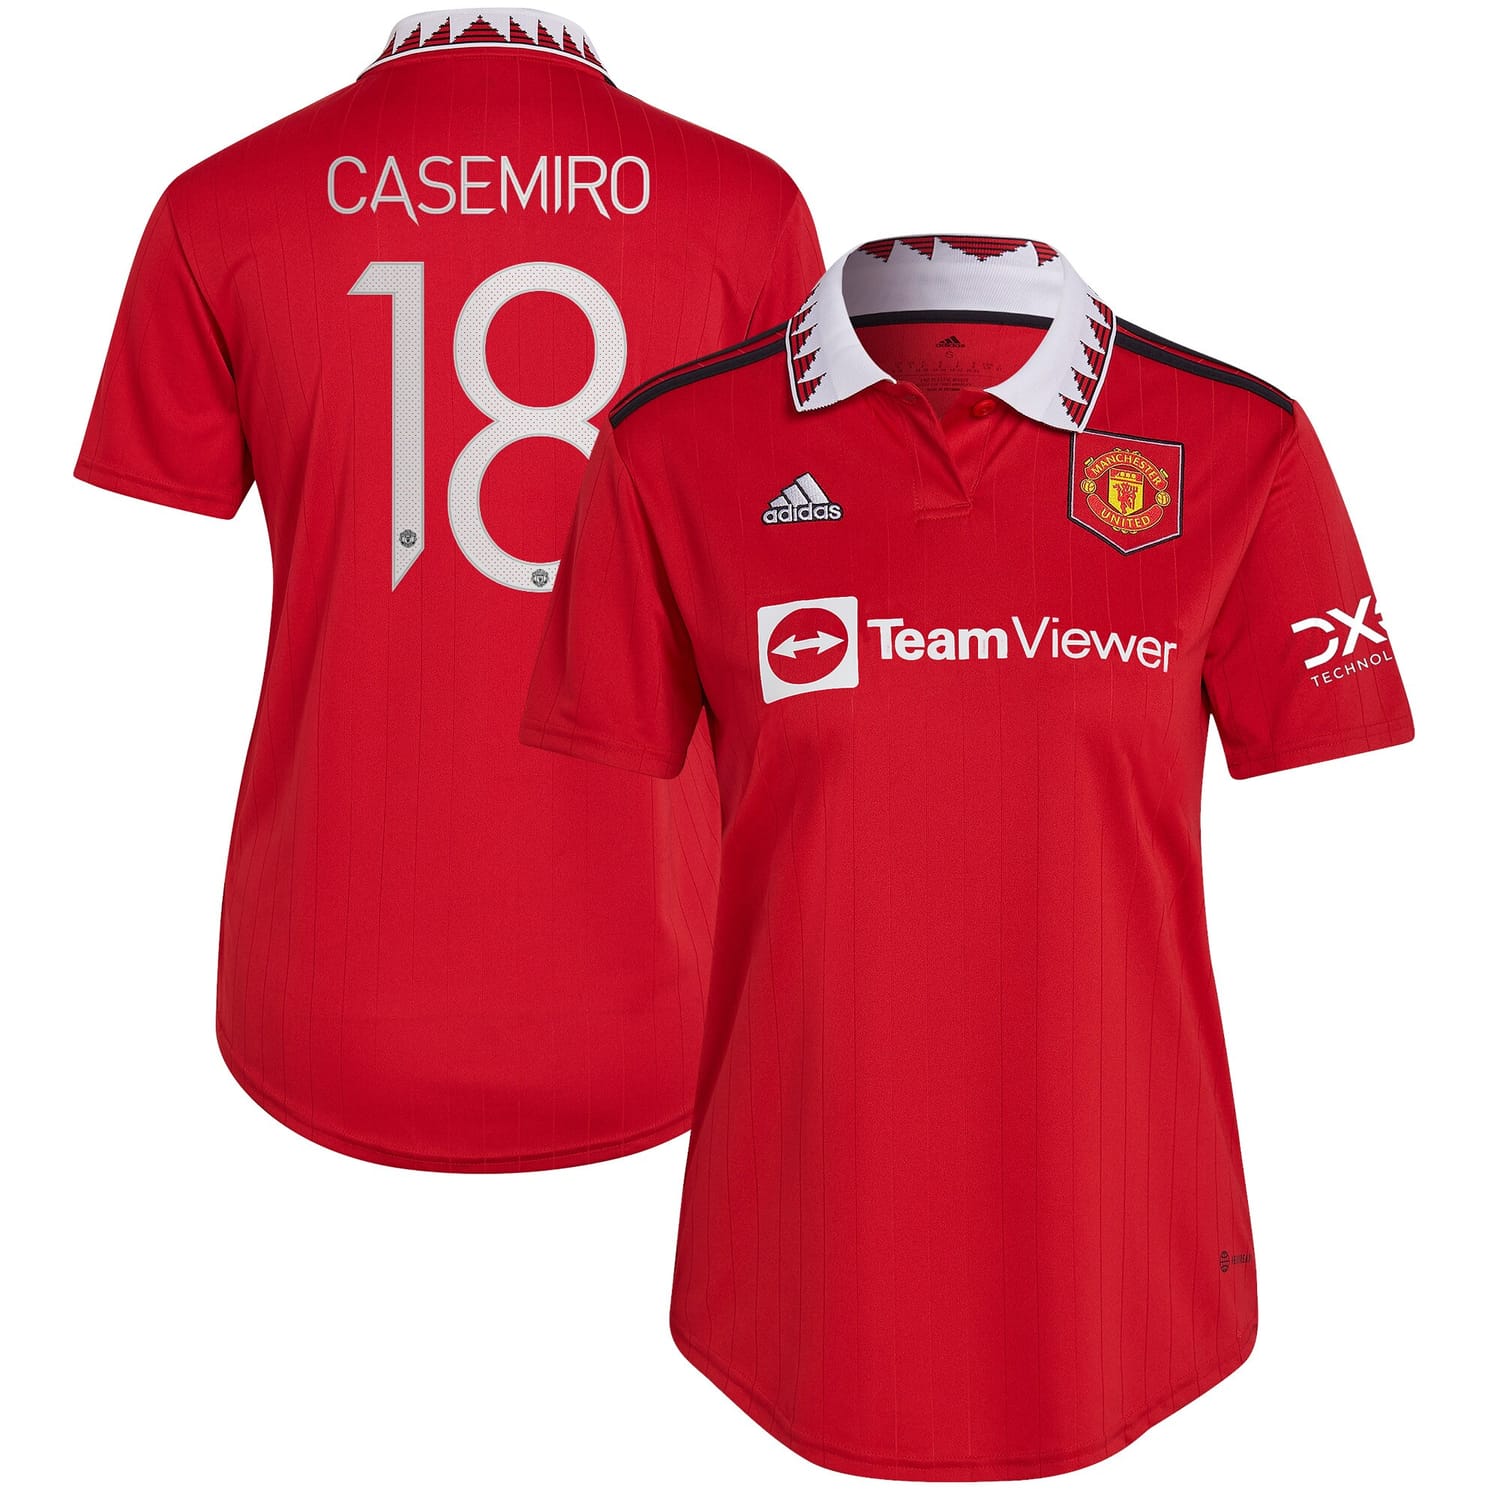 Premier League Manchester United Home Cup Jersey Shirt 2022-23 player Casemiro 18 printing for Women